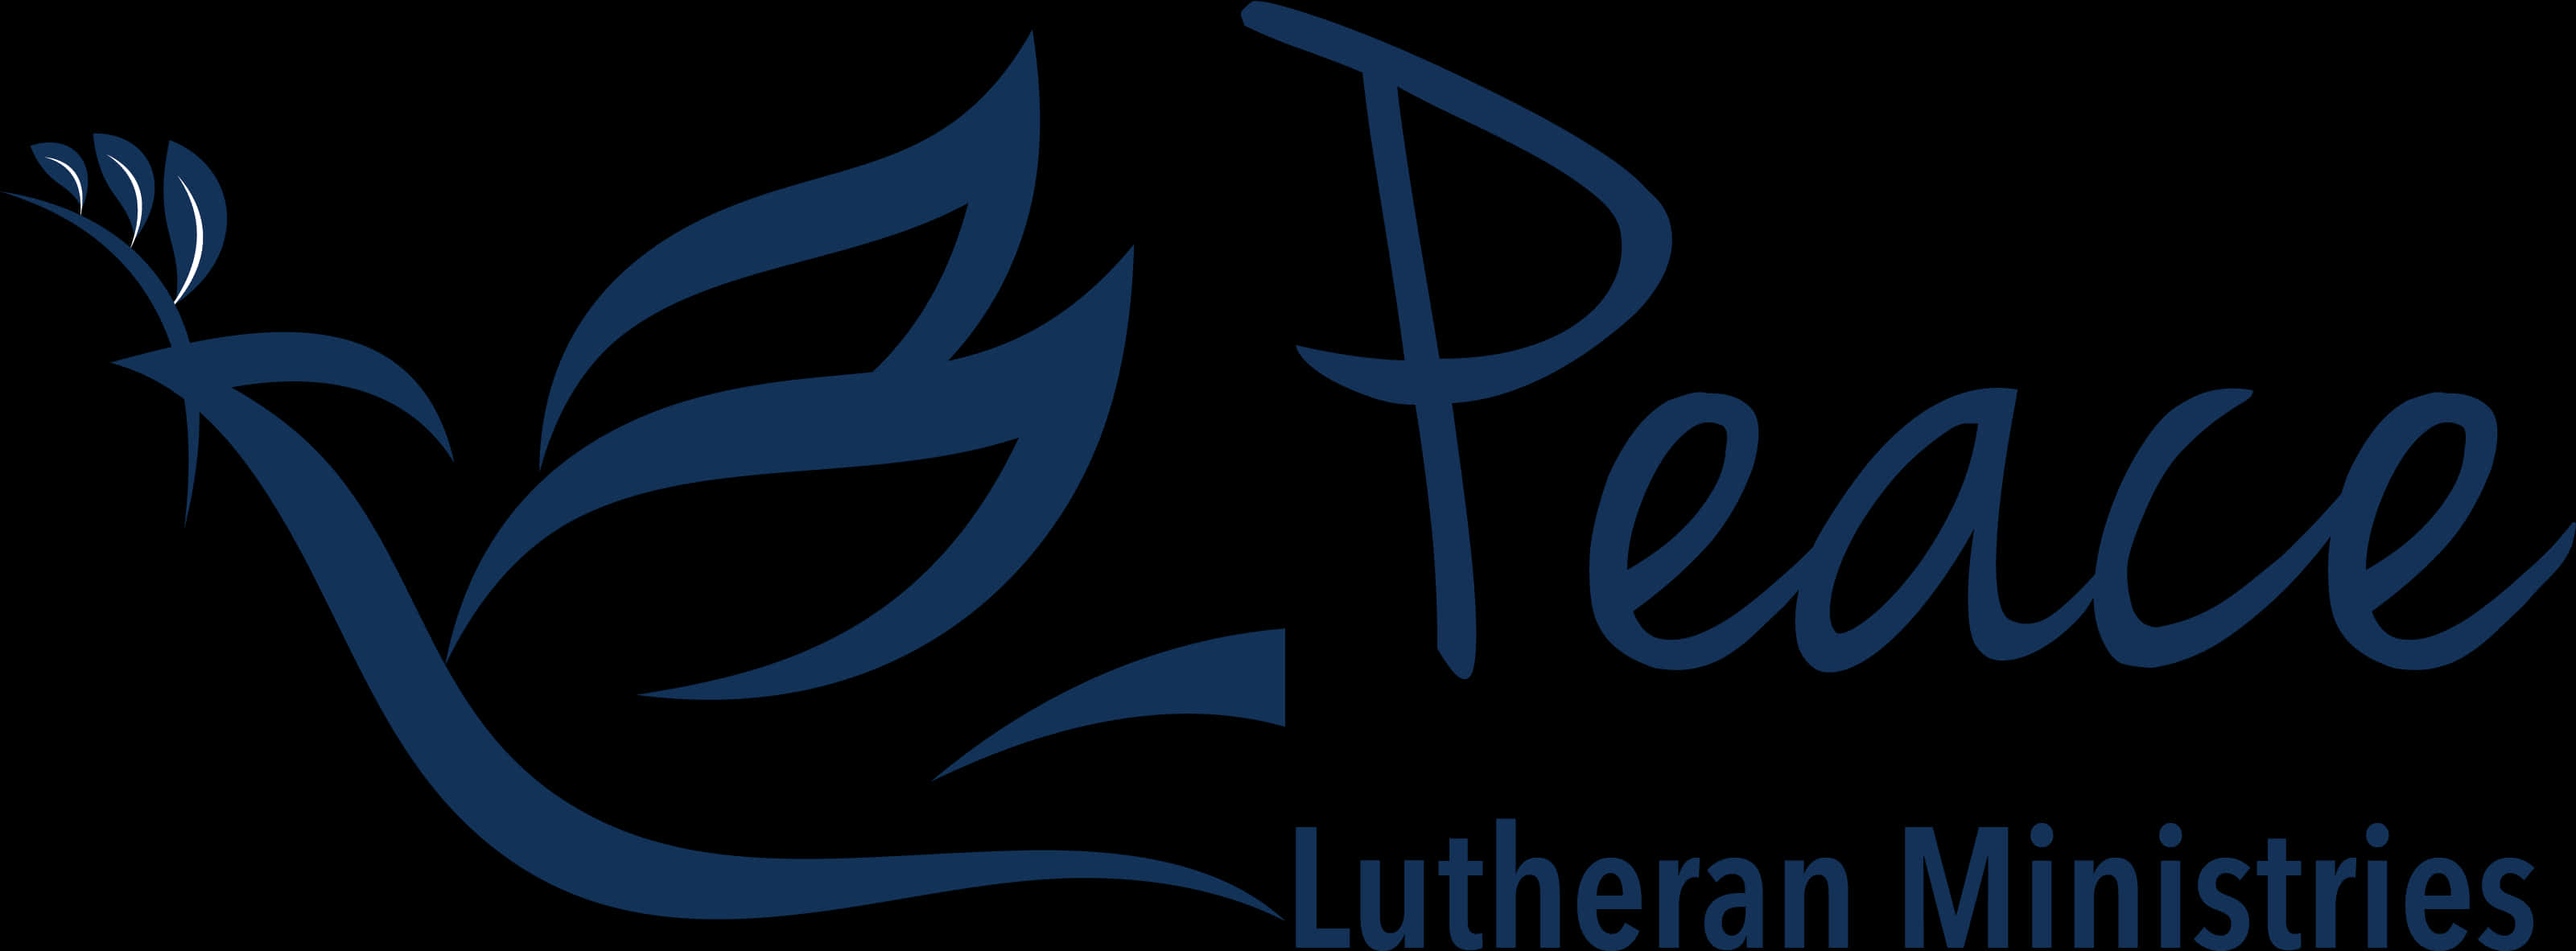 Peace Lutheran Ministries Logowith Dove PNG